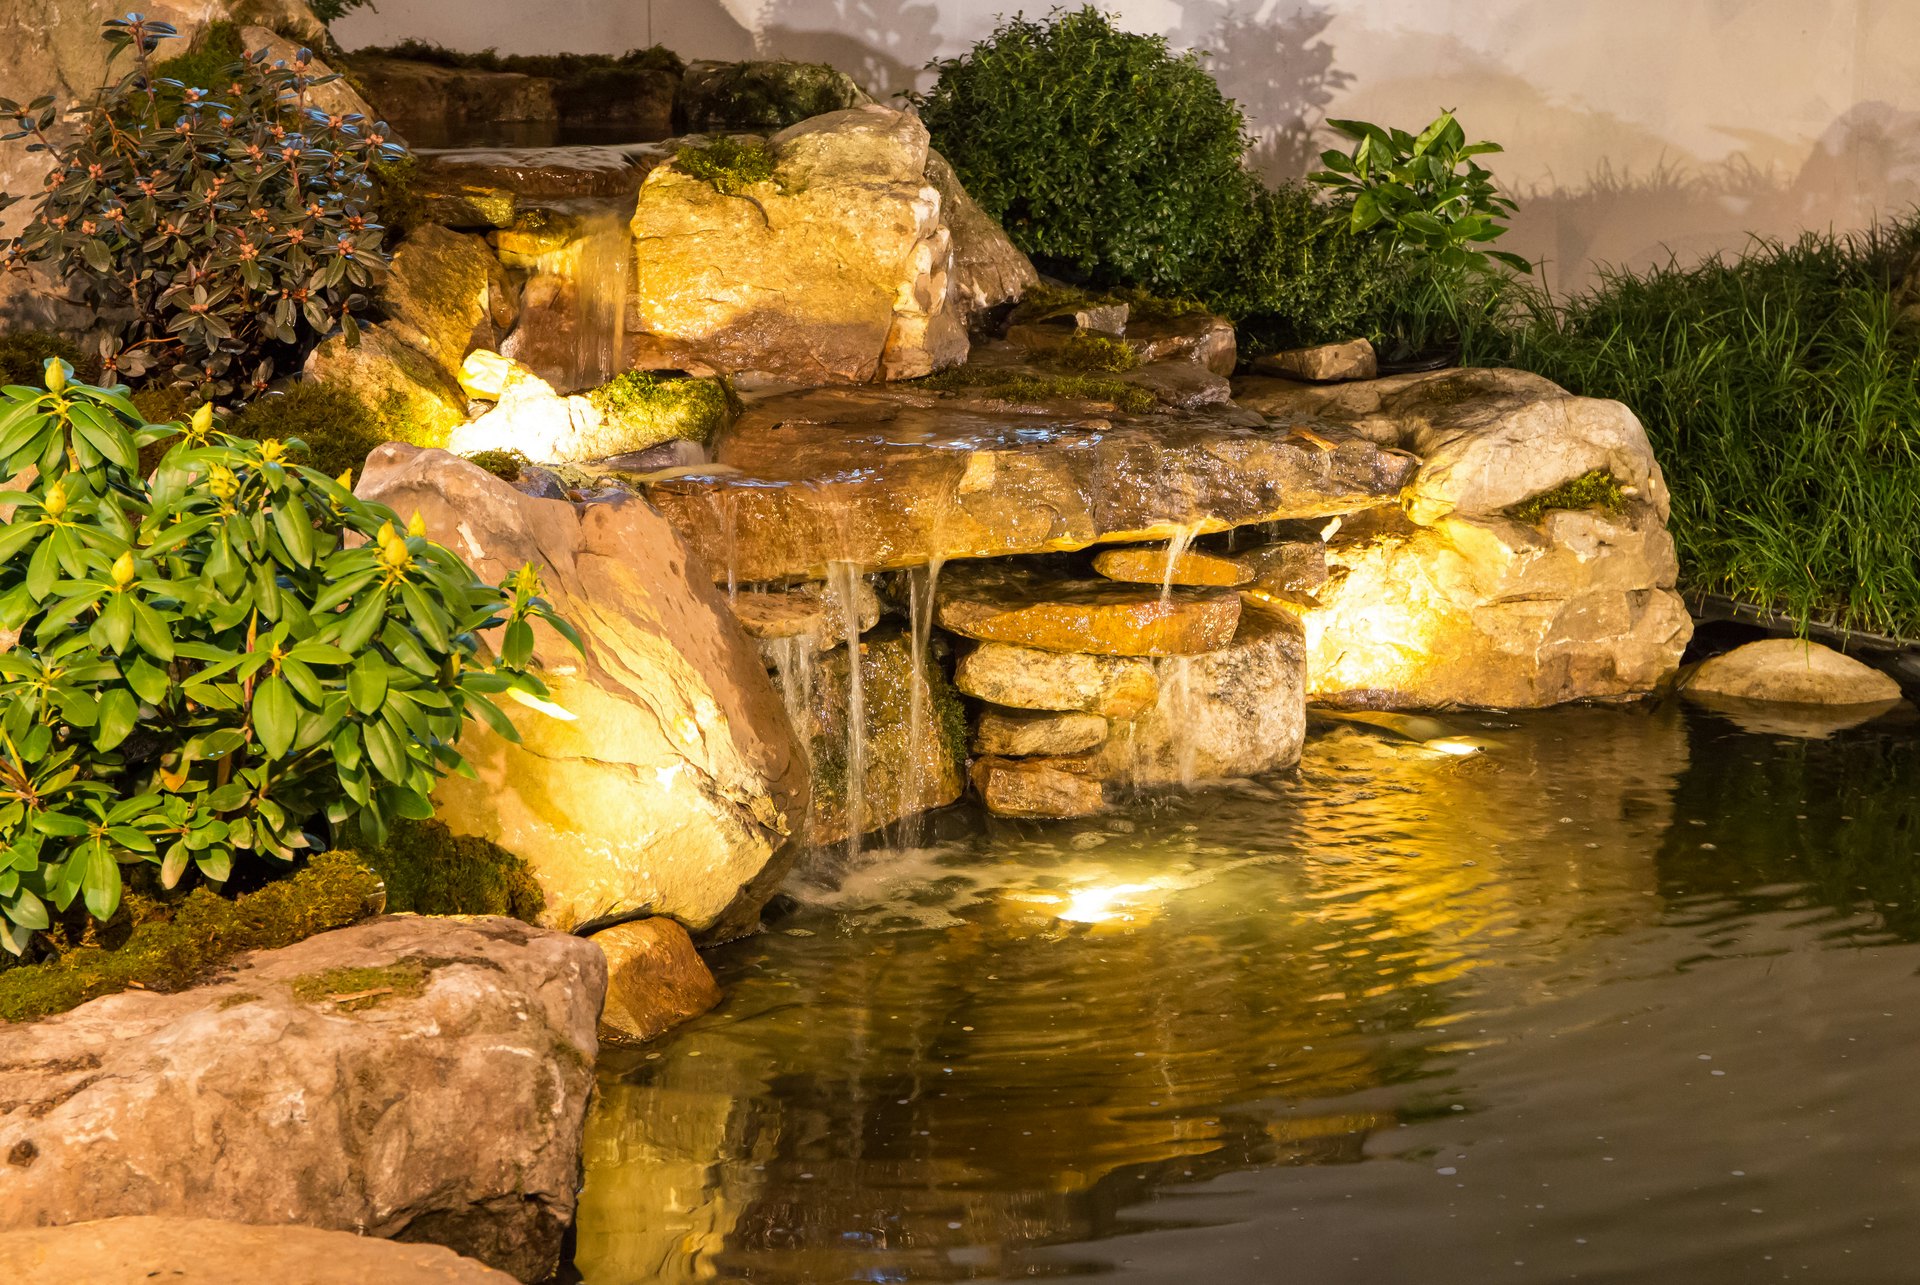 Water features add a relaxing element to an outdoor space.